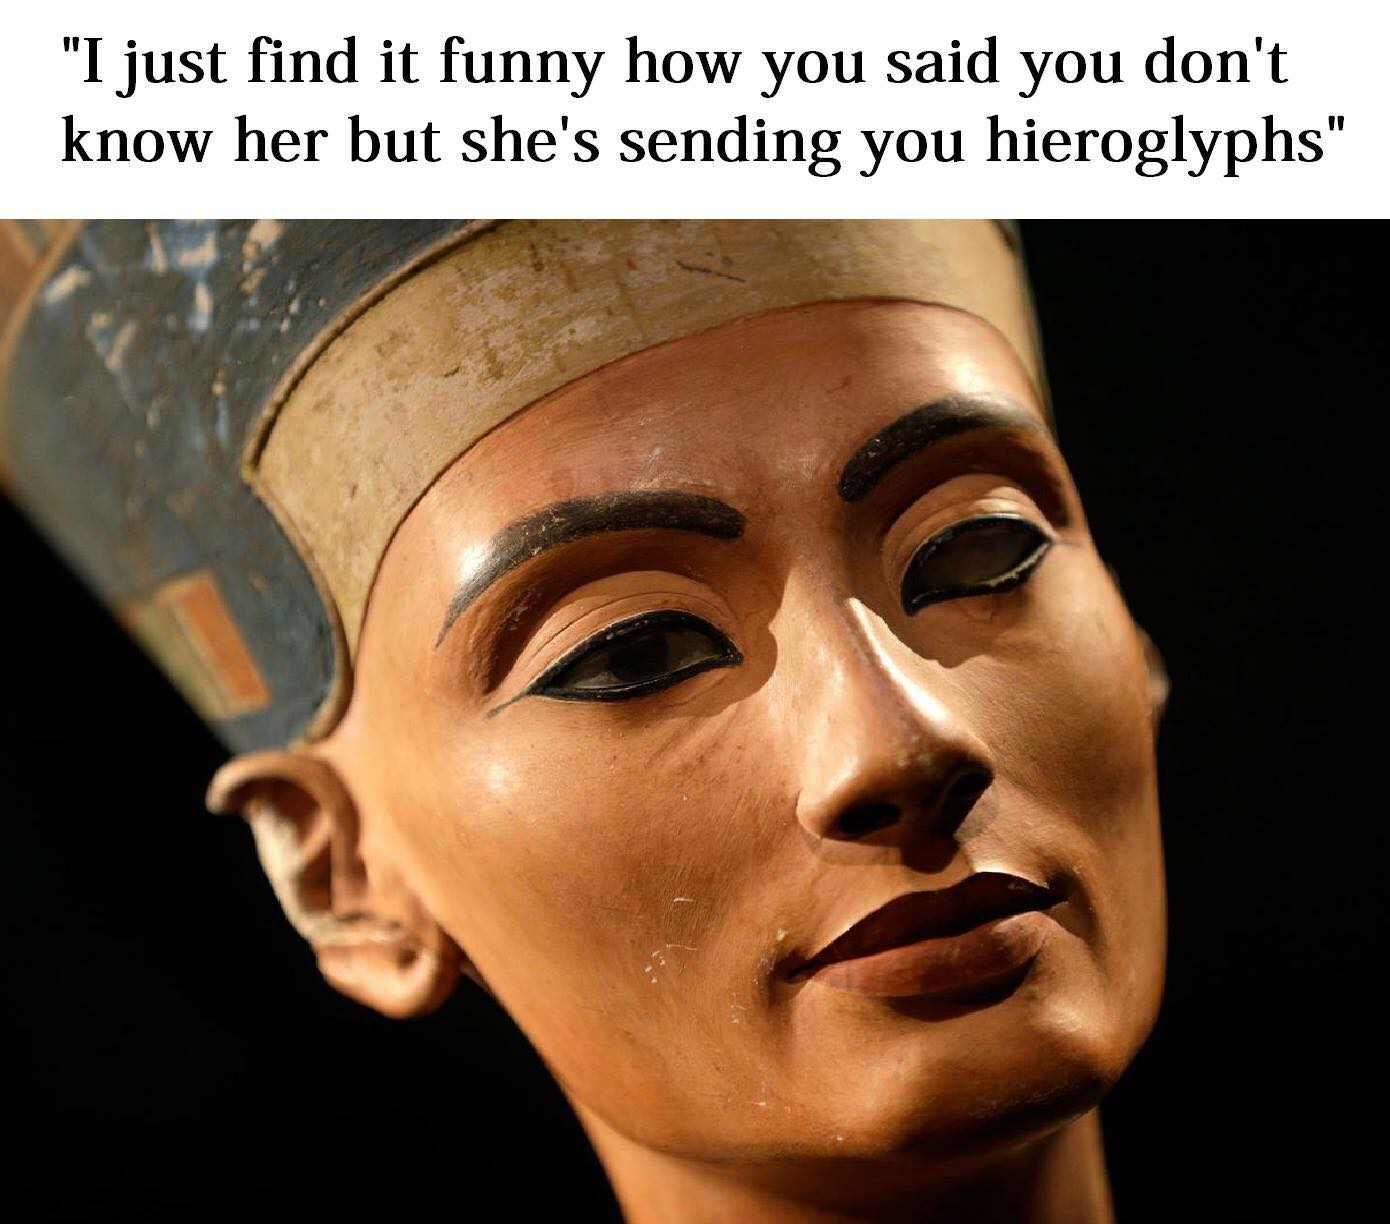 memes - nefertiti mummy - "I just find it funny how you said you don't know her but she's sending you hieroglyphs"